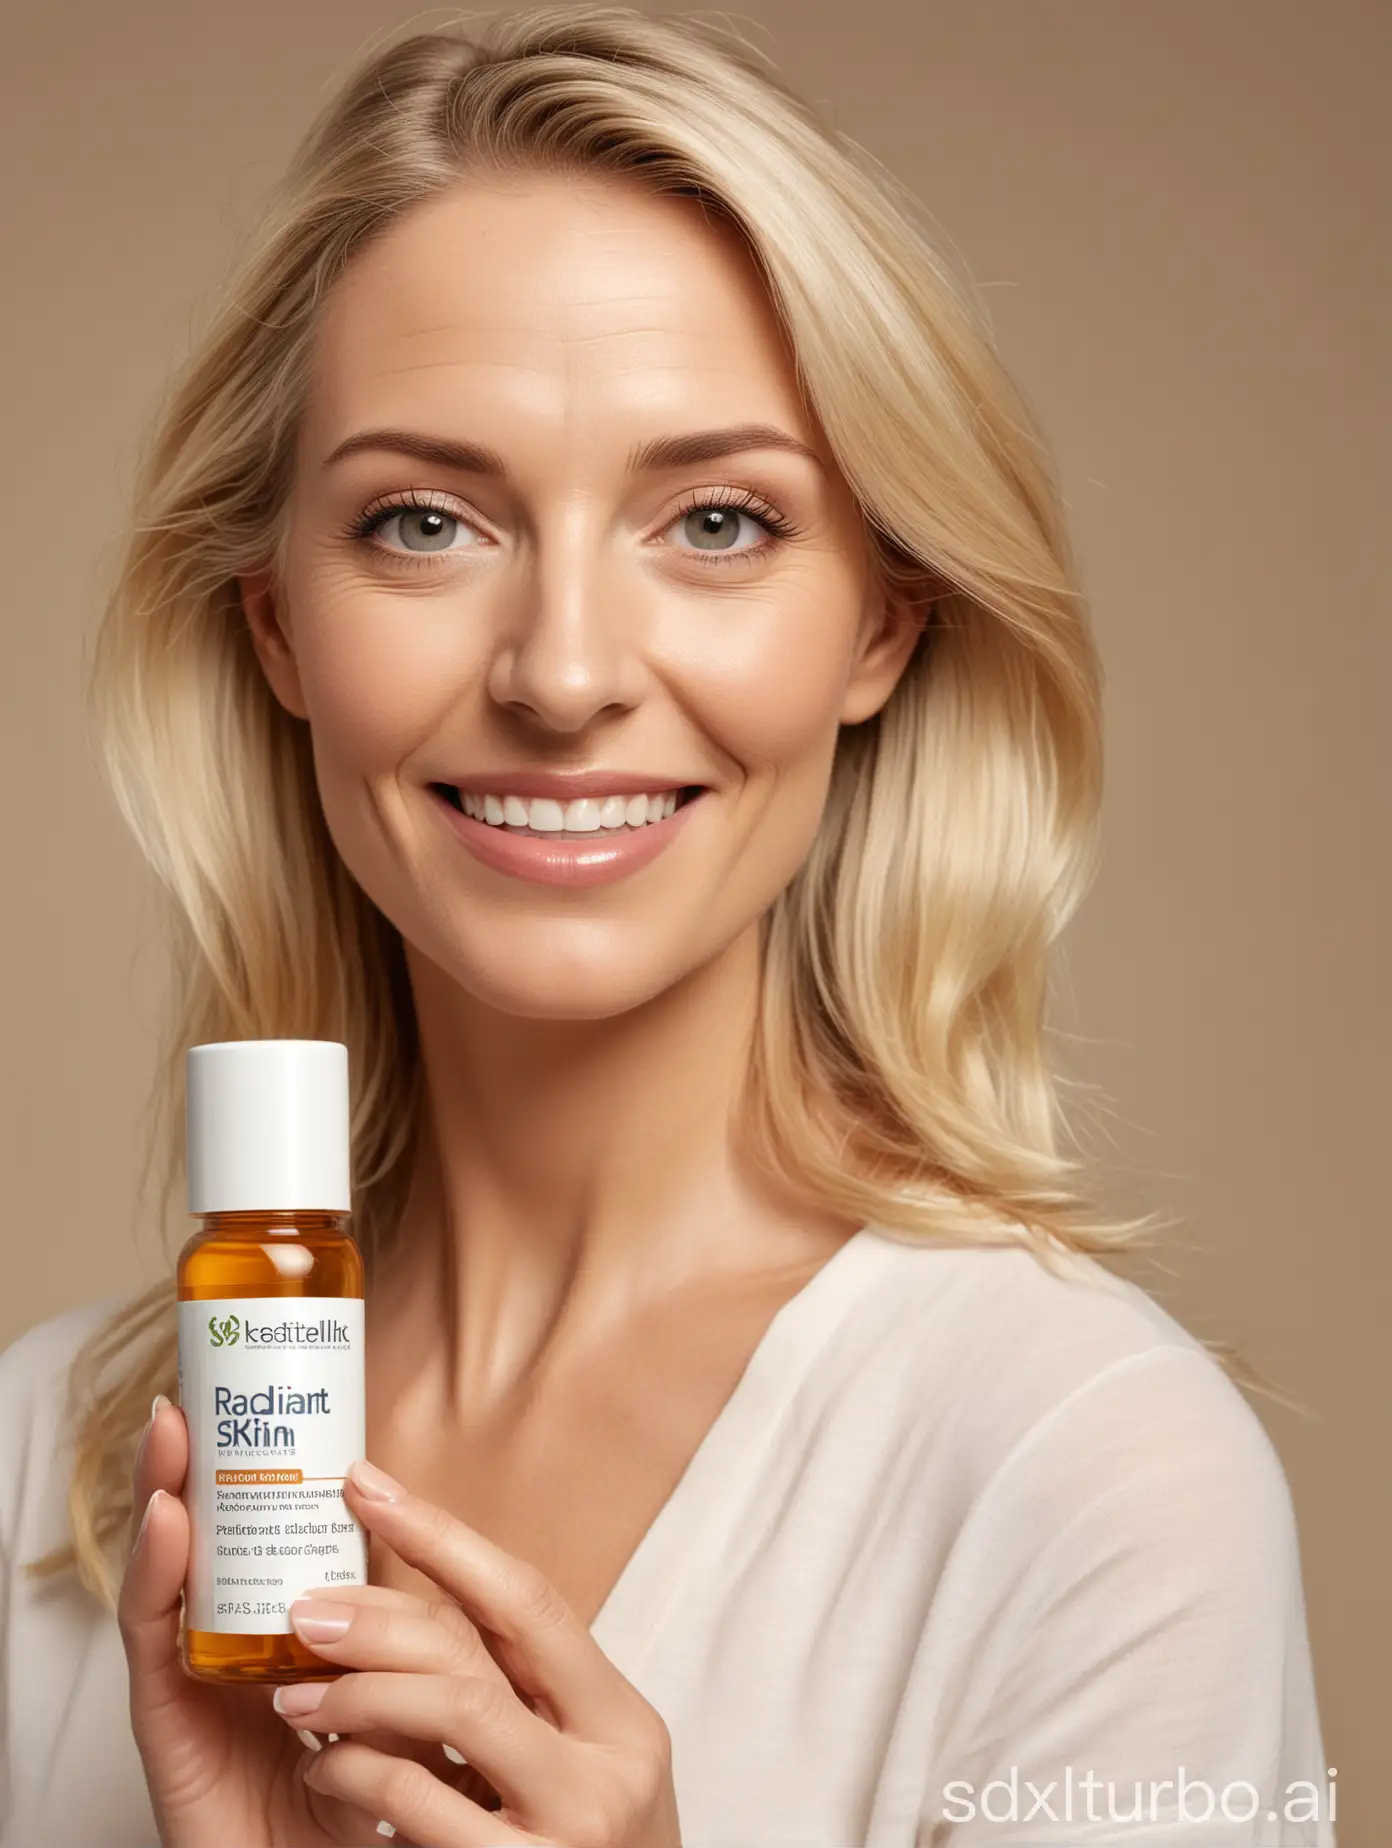 Radiant-Skin-Skincare-Product-Featuring-MiddleAged-Blonde-Woman-with-Vitamin-Pills